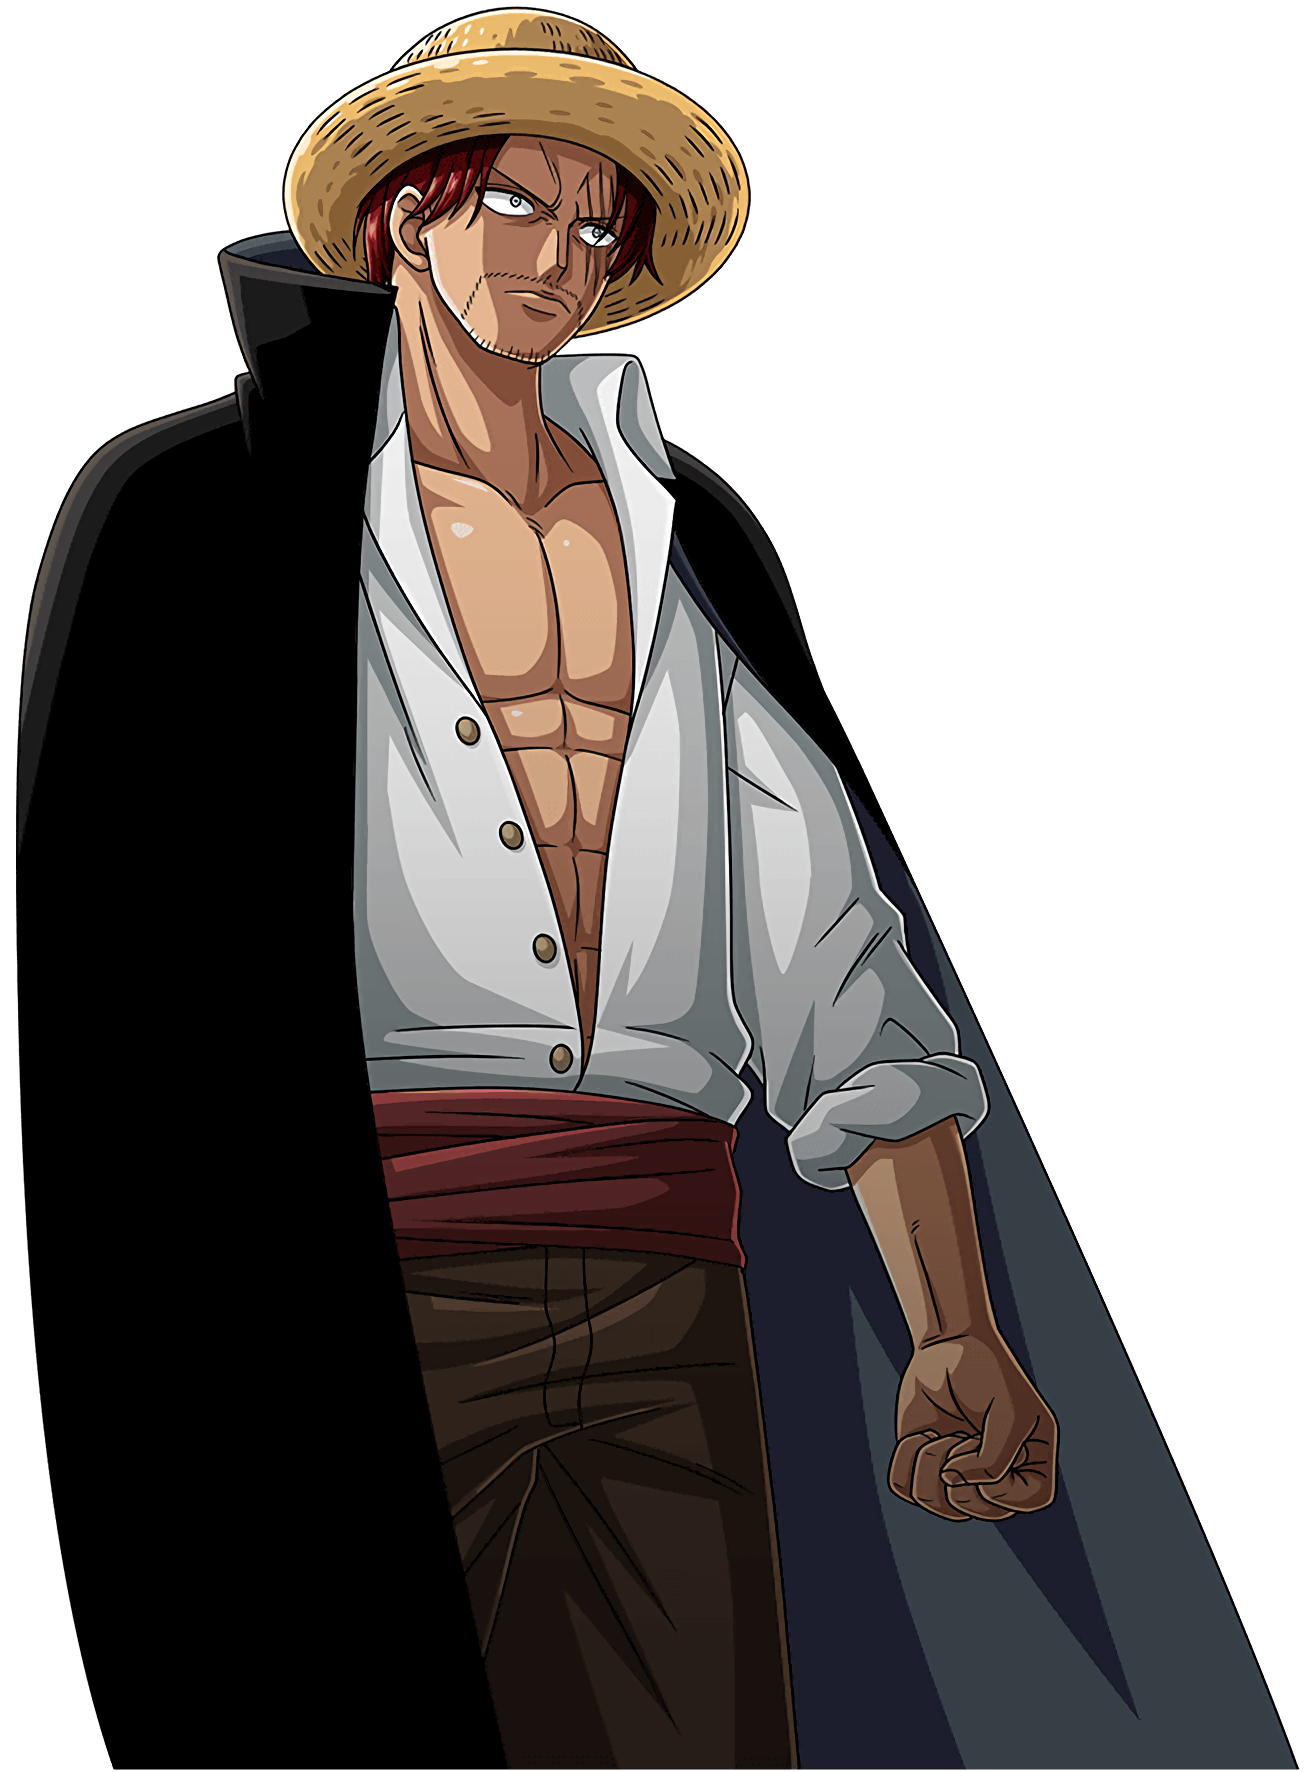 Crew Shanks - One Piece by caiquenadal on DeviantArt